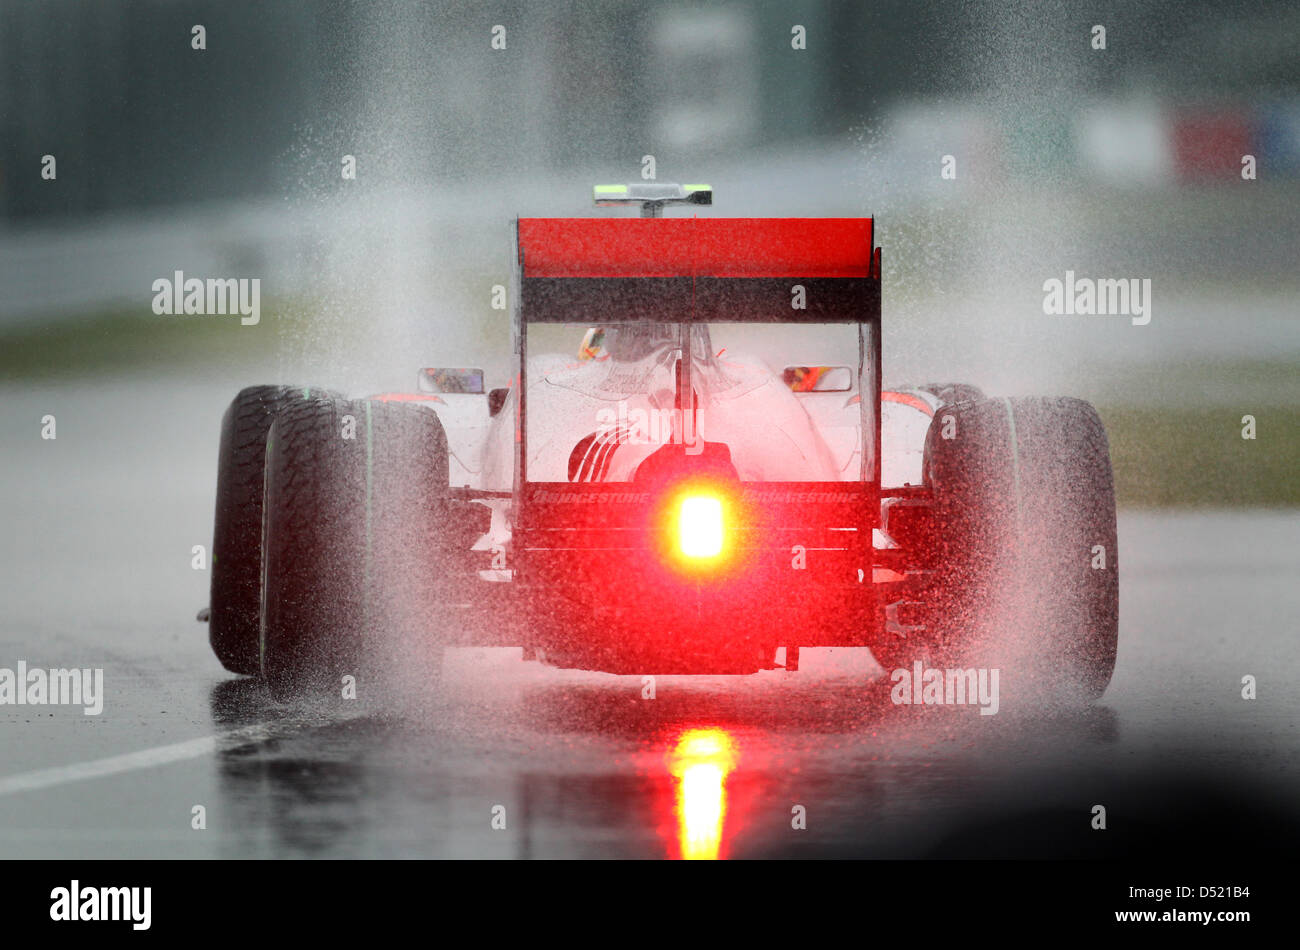 British formula one driver Lewis Hamilton of Team McLaren Mercedes pulls out of the pit lane in his racing car in heavy rainfall during the third practice session for the Japanese Grand Prix at the Suzuka Circuit in Suzuka, Japan, 09 October 2010. The 2010 Formula One Japanese Grand Prix is held on 10 October. Photo: Jens Buettner Stock Photo